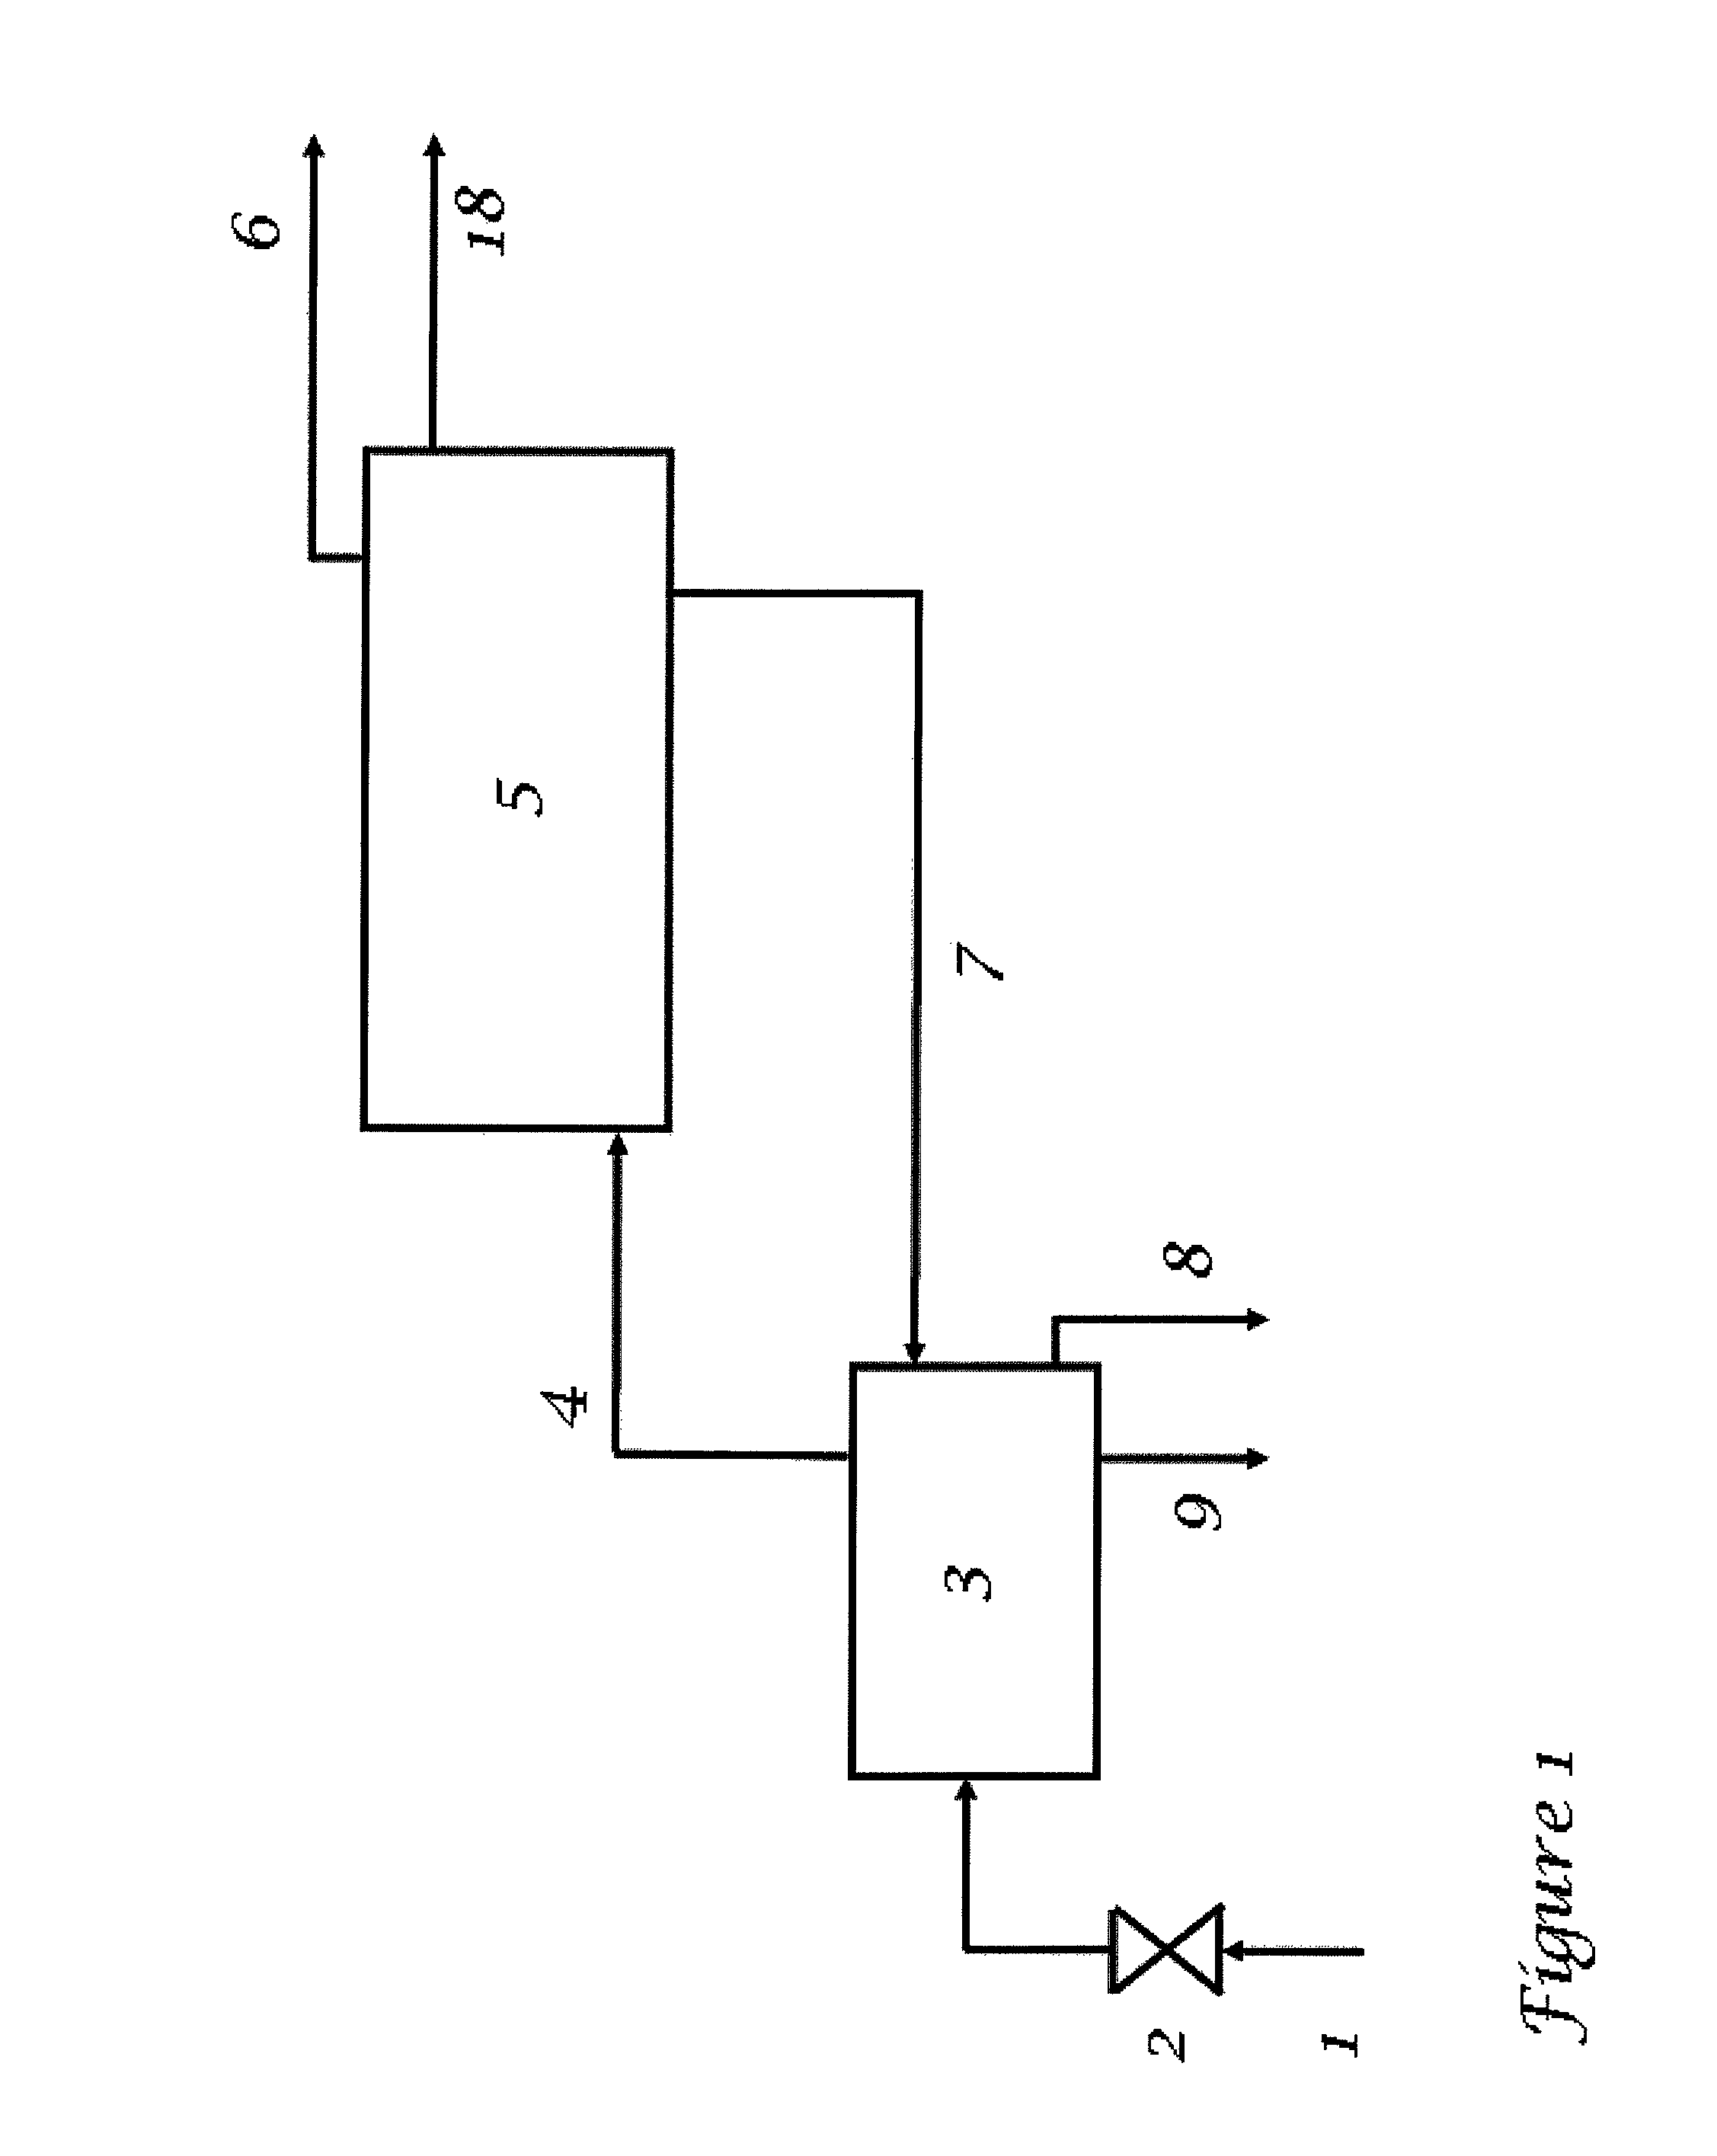 Treatment of produced hydrocarbon fluid containing water